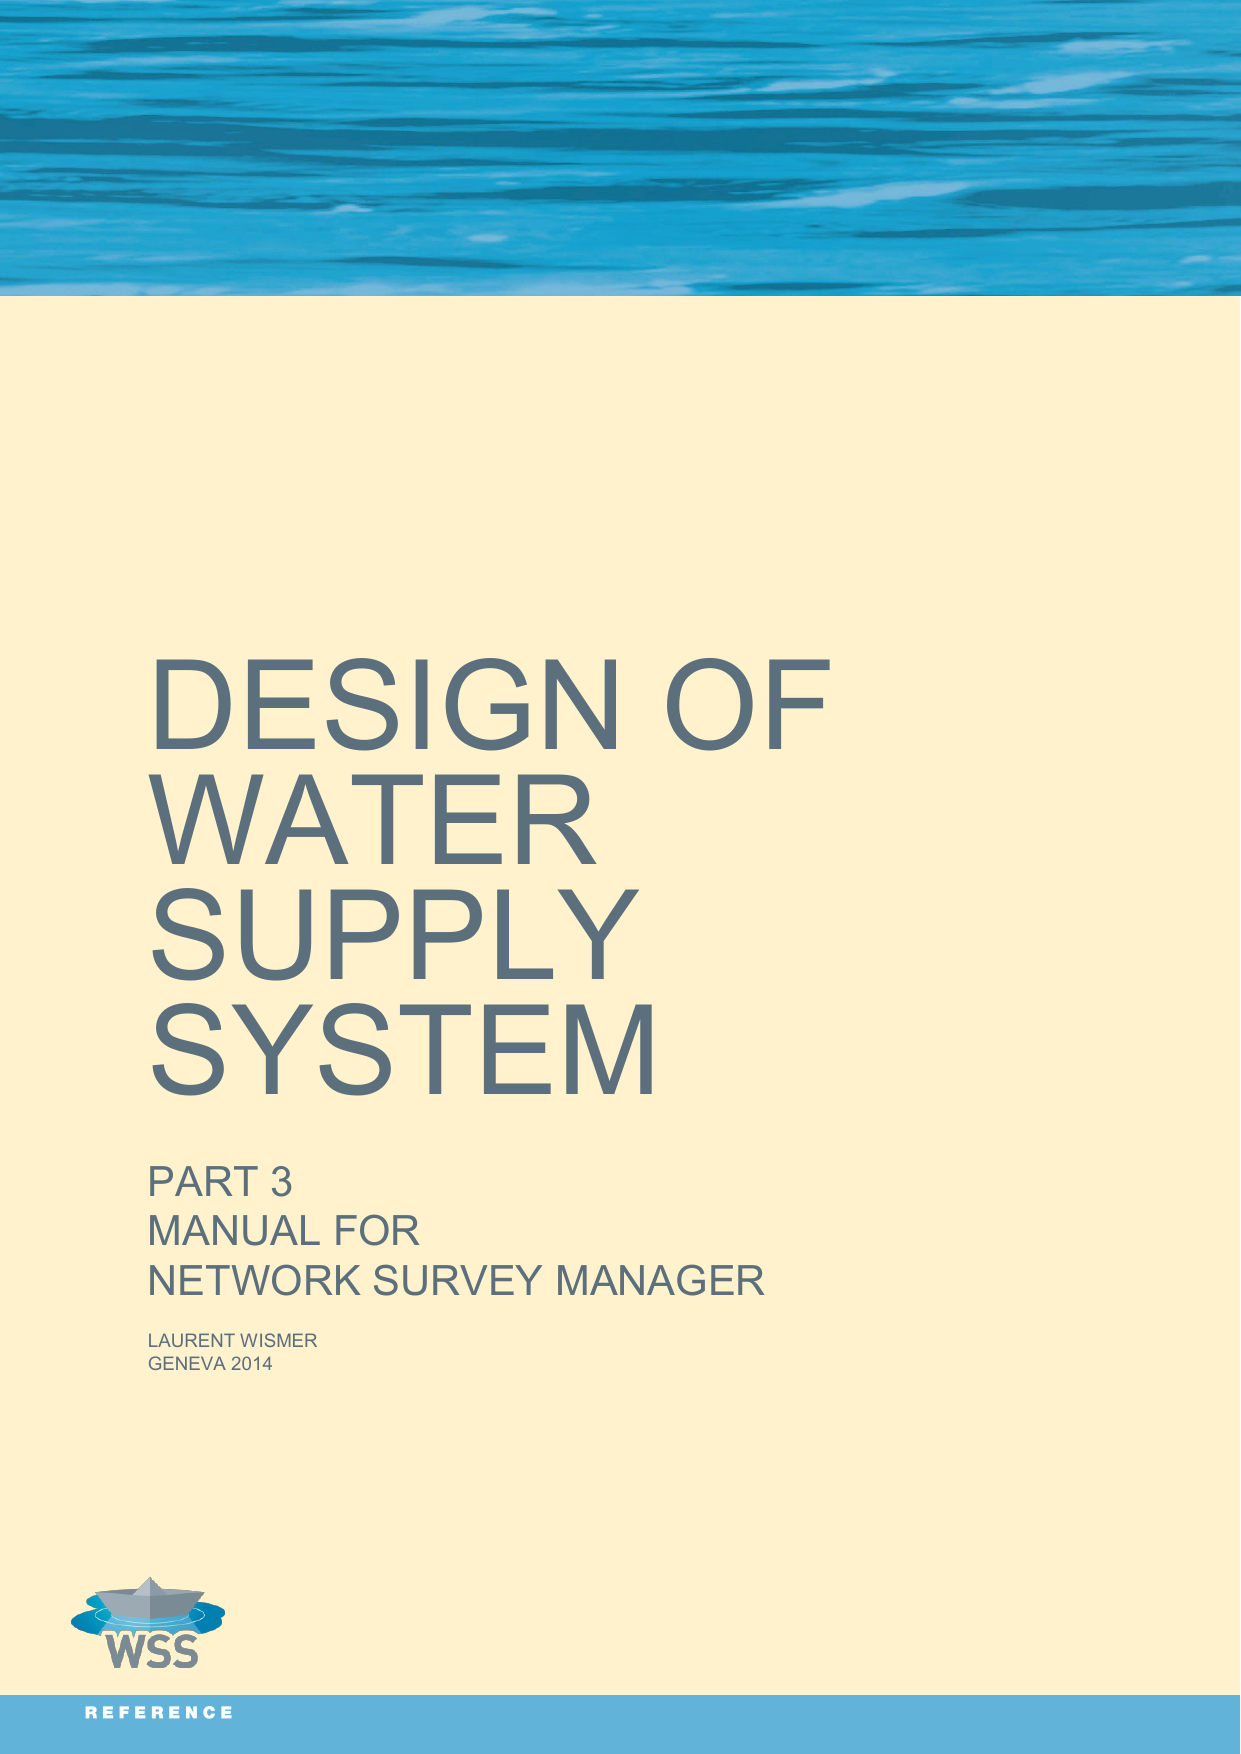 Network Survey Managerdesign Water Supply System